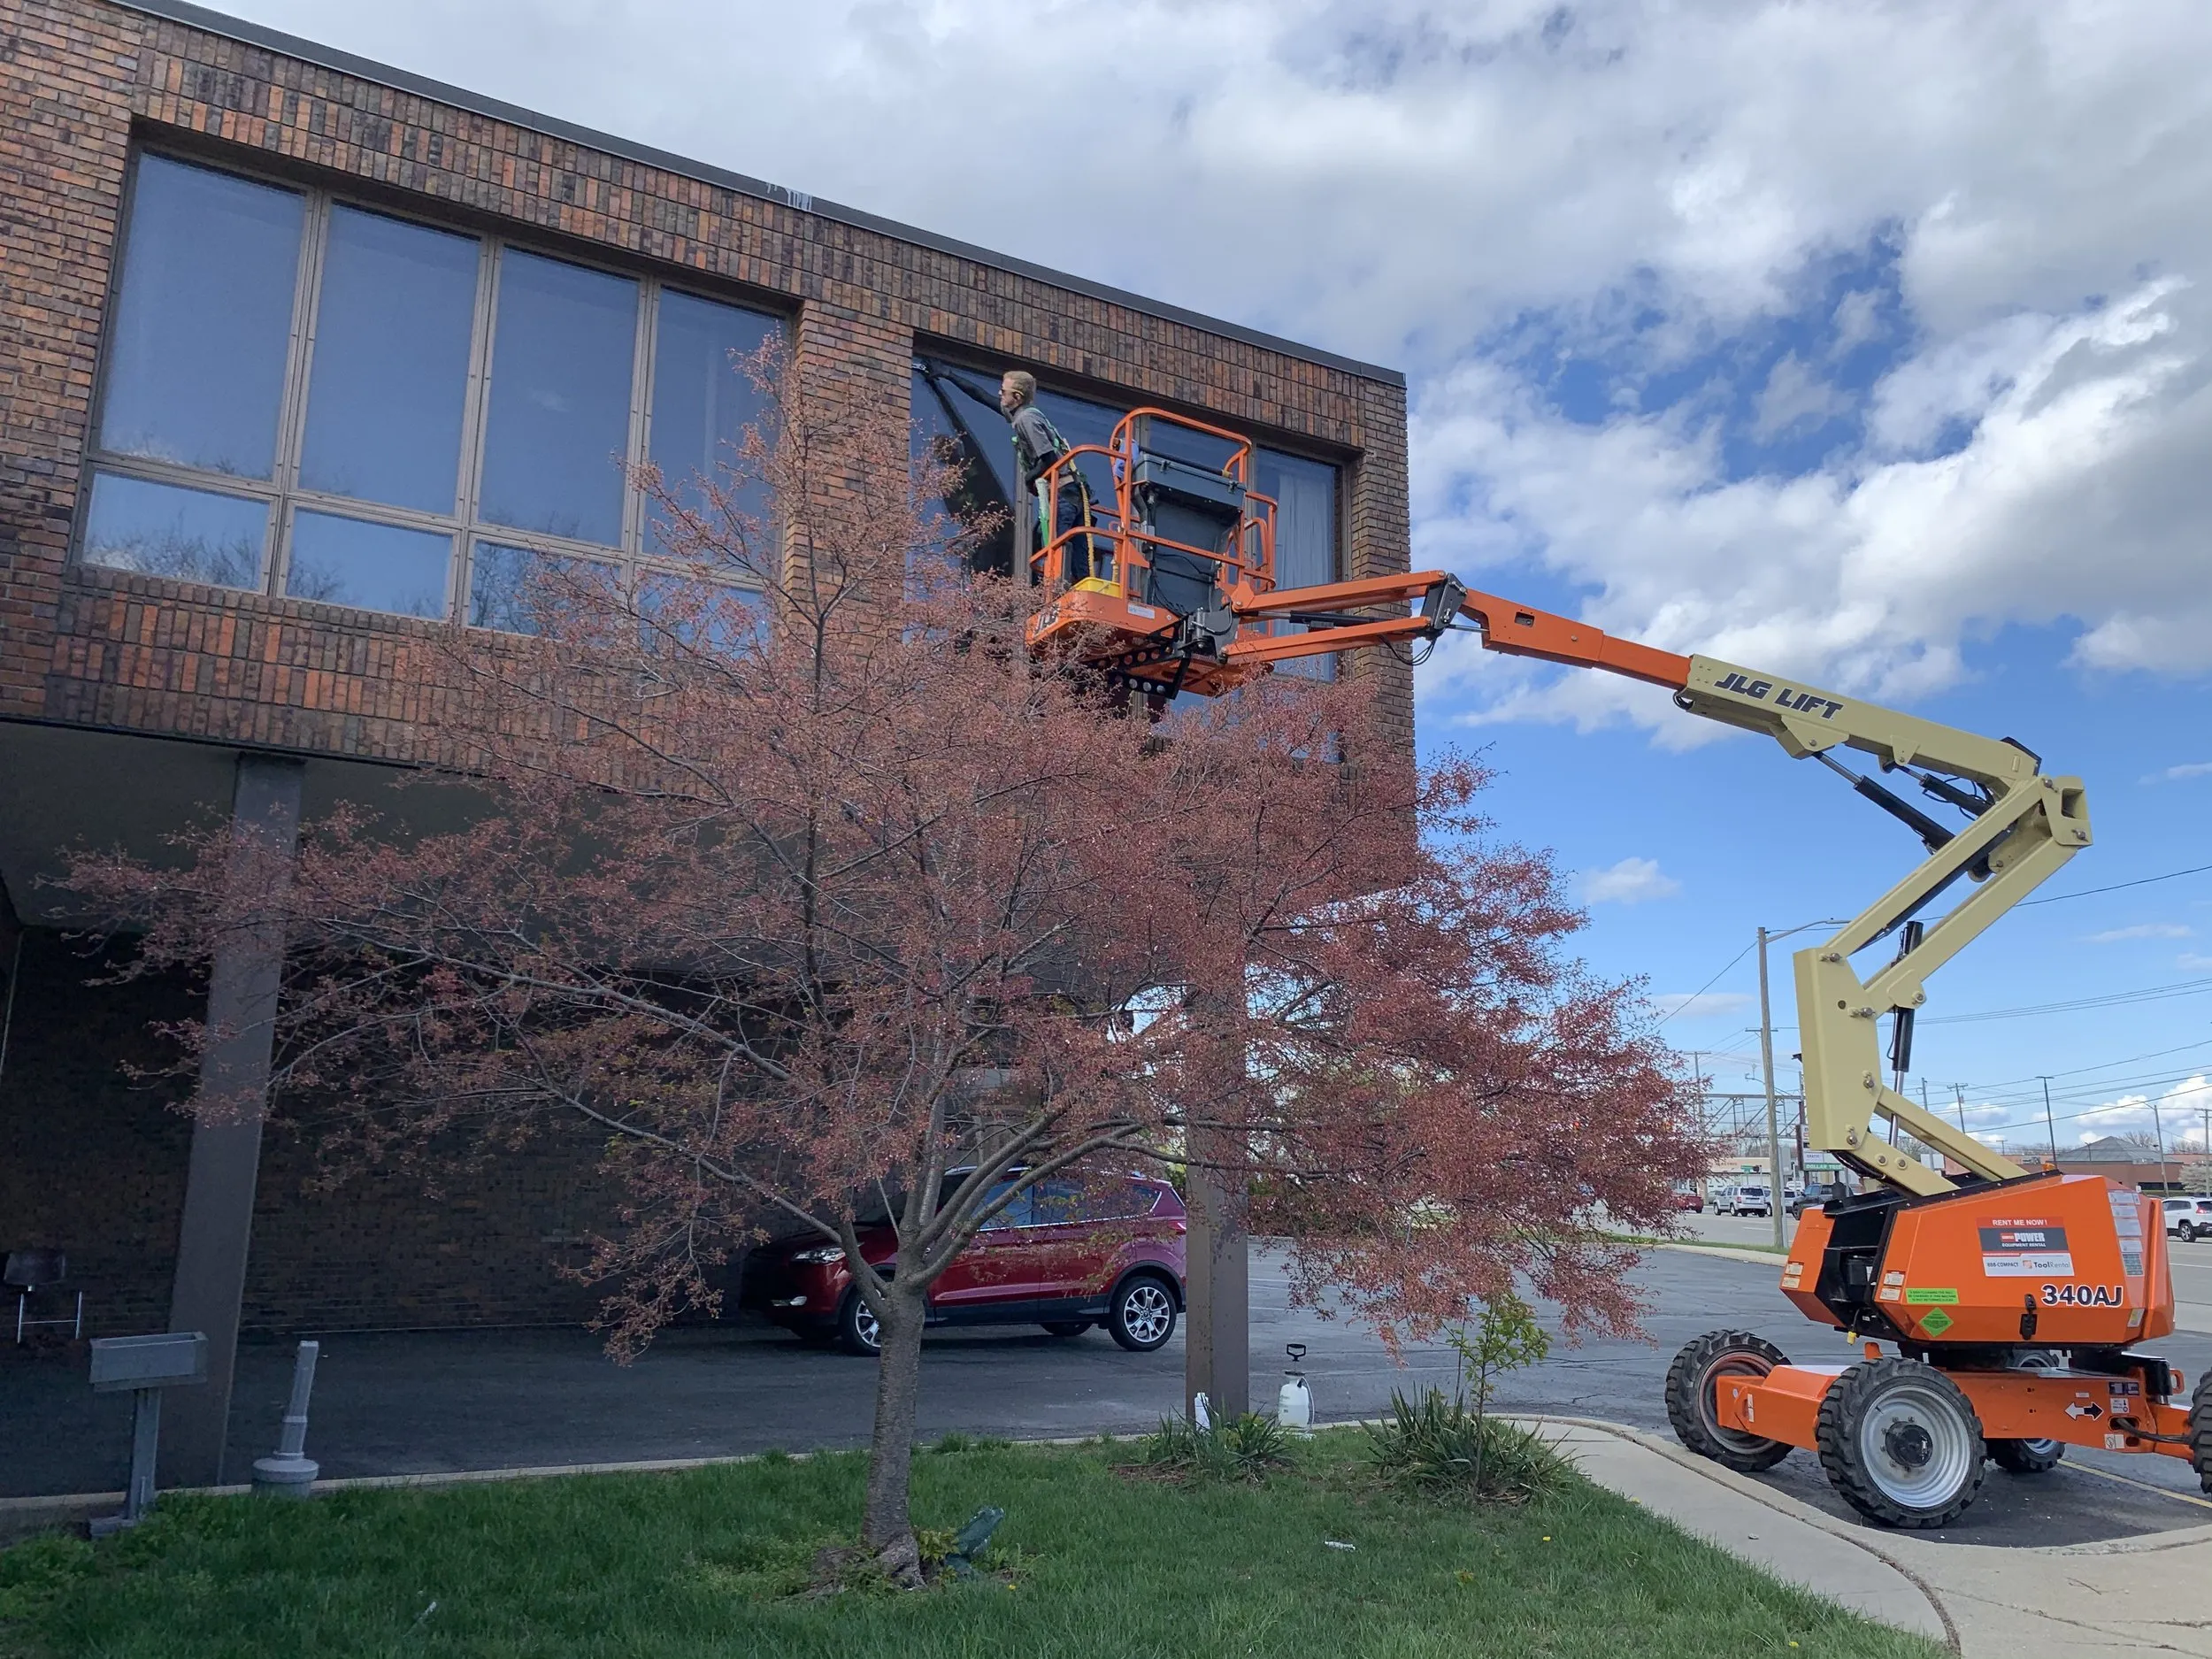 Commercial window cleaning for business customer satisfaction in Knoxville, TN.